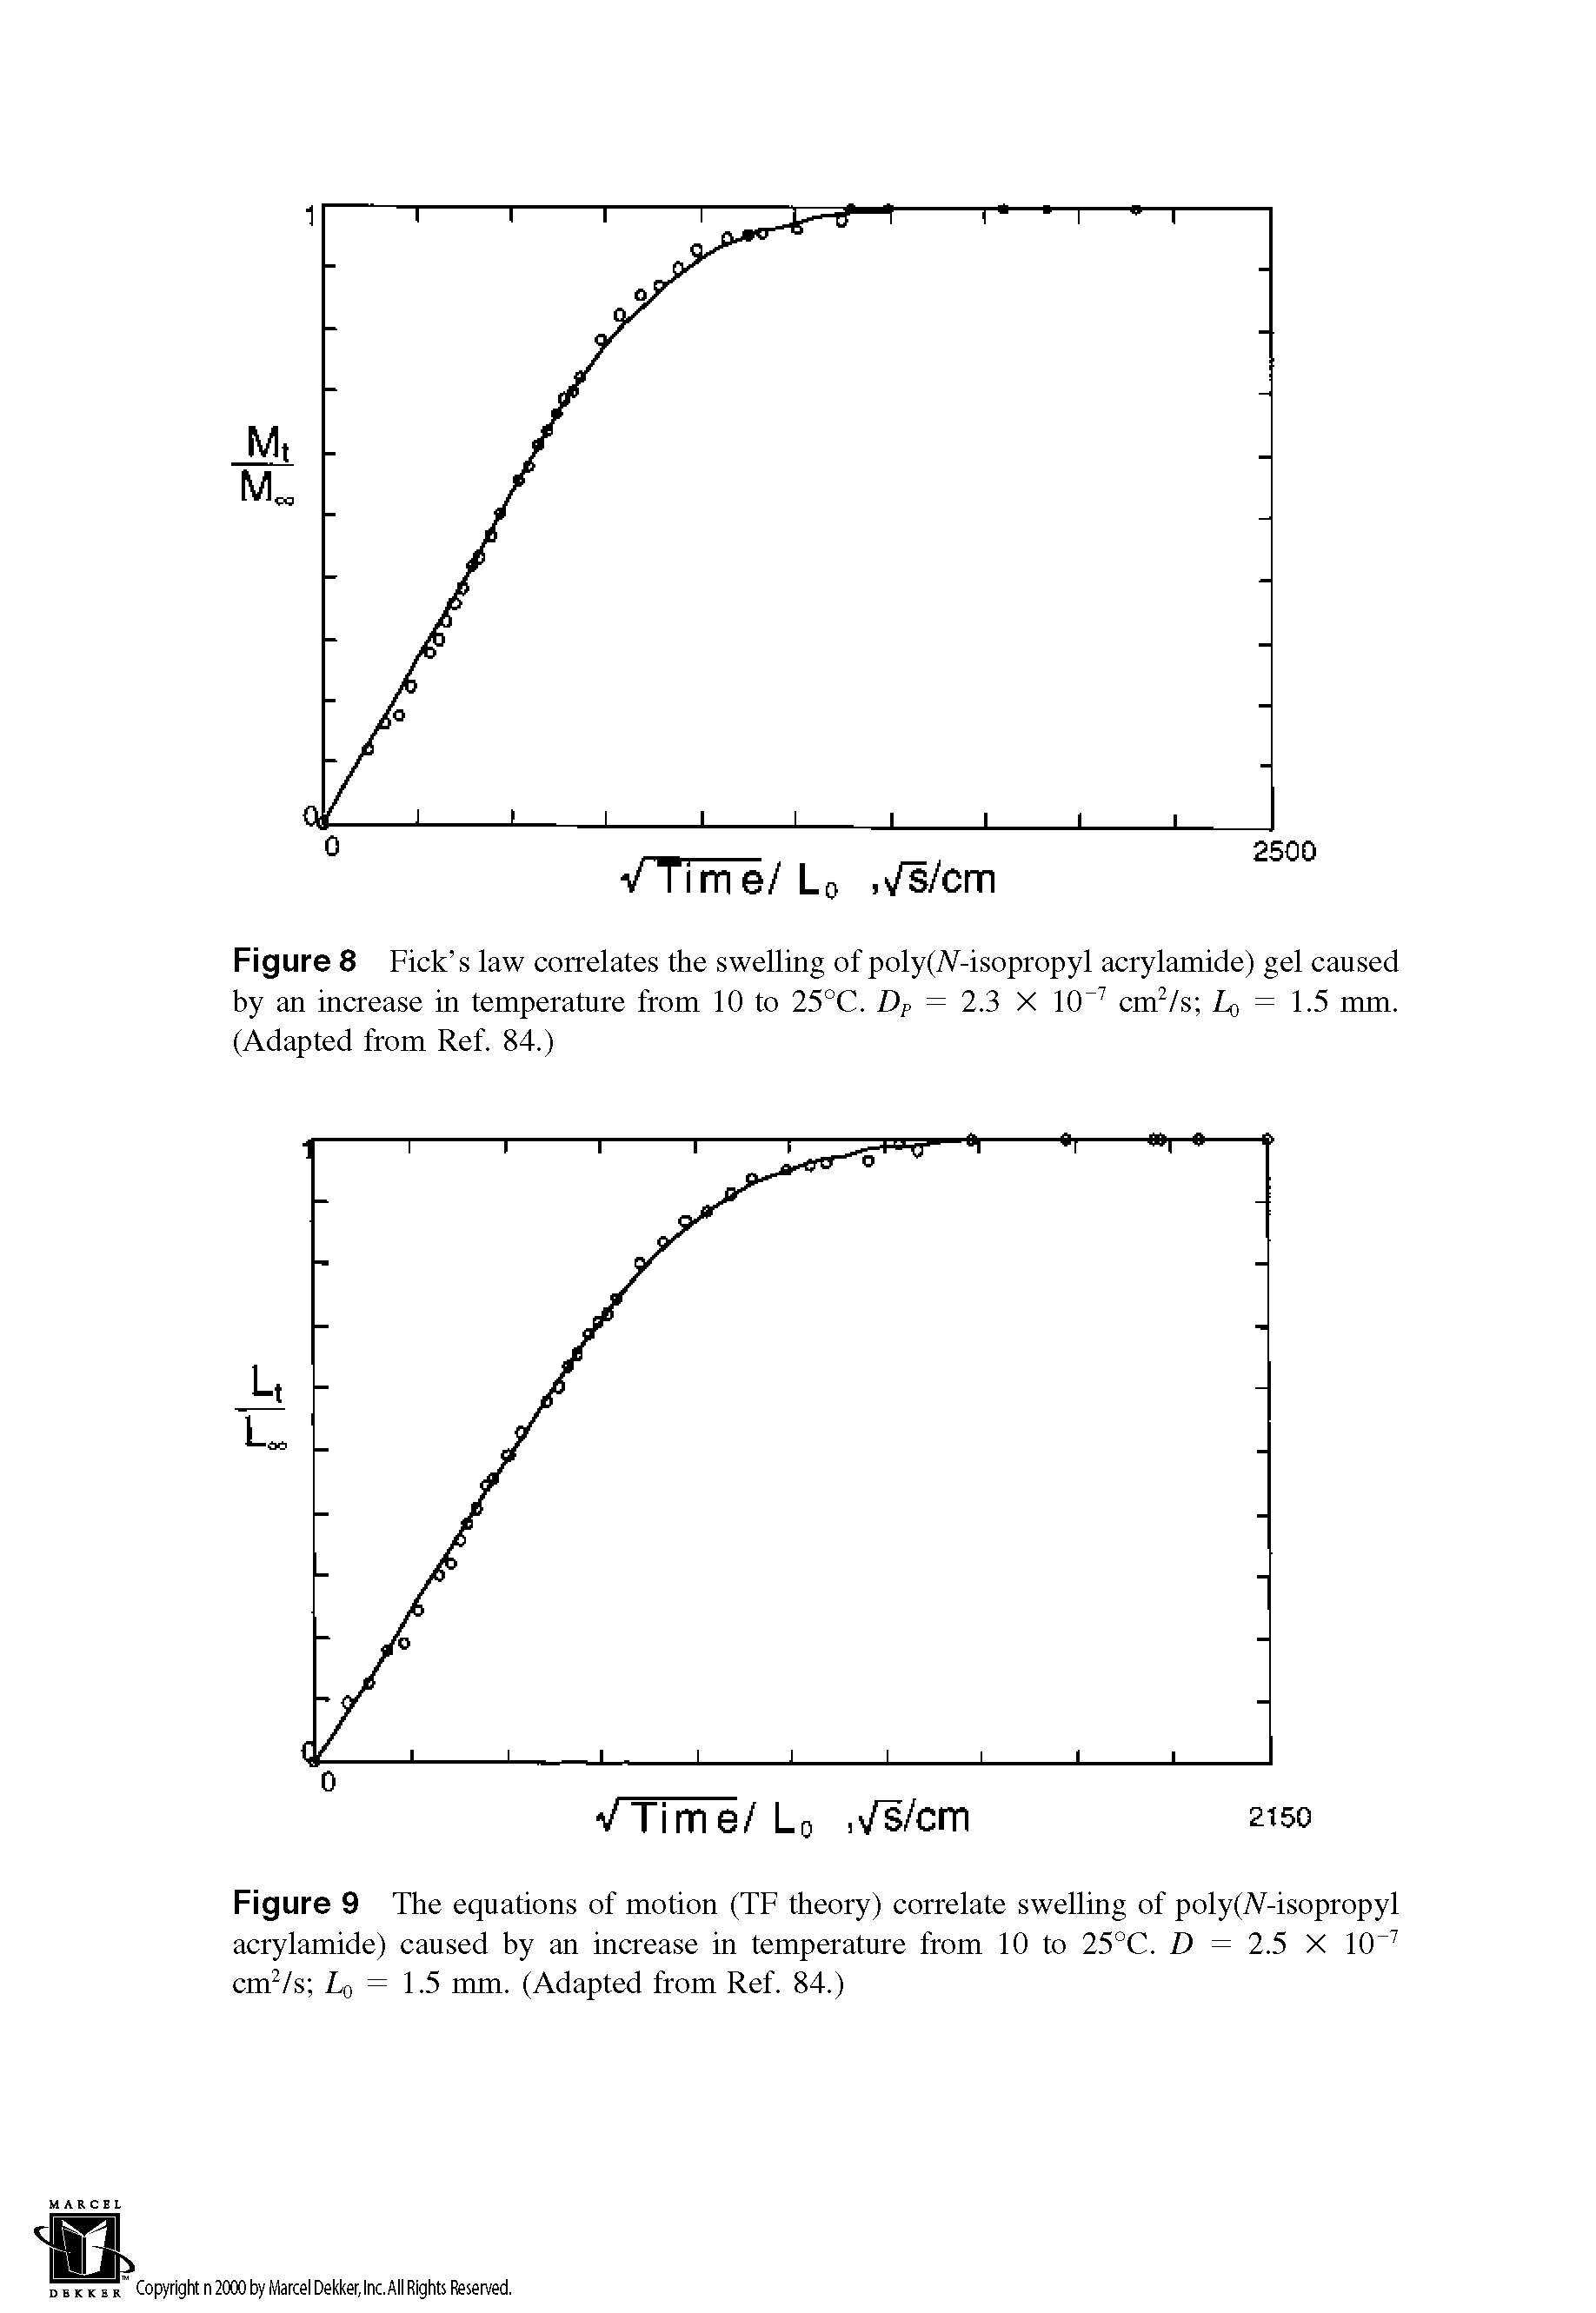 Figure 9 The equations of motion (TF theory) correlate swelling of poly(A-isopropyl acrylamide) caused by an increase in temperature from 10 to 25°C. D = 2.5 X 10 7 cm2/s L0 = 1.5 mm. (Adapted from Ref. 84.)...